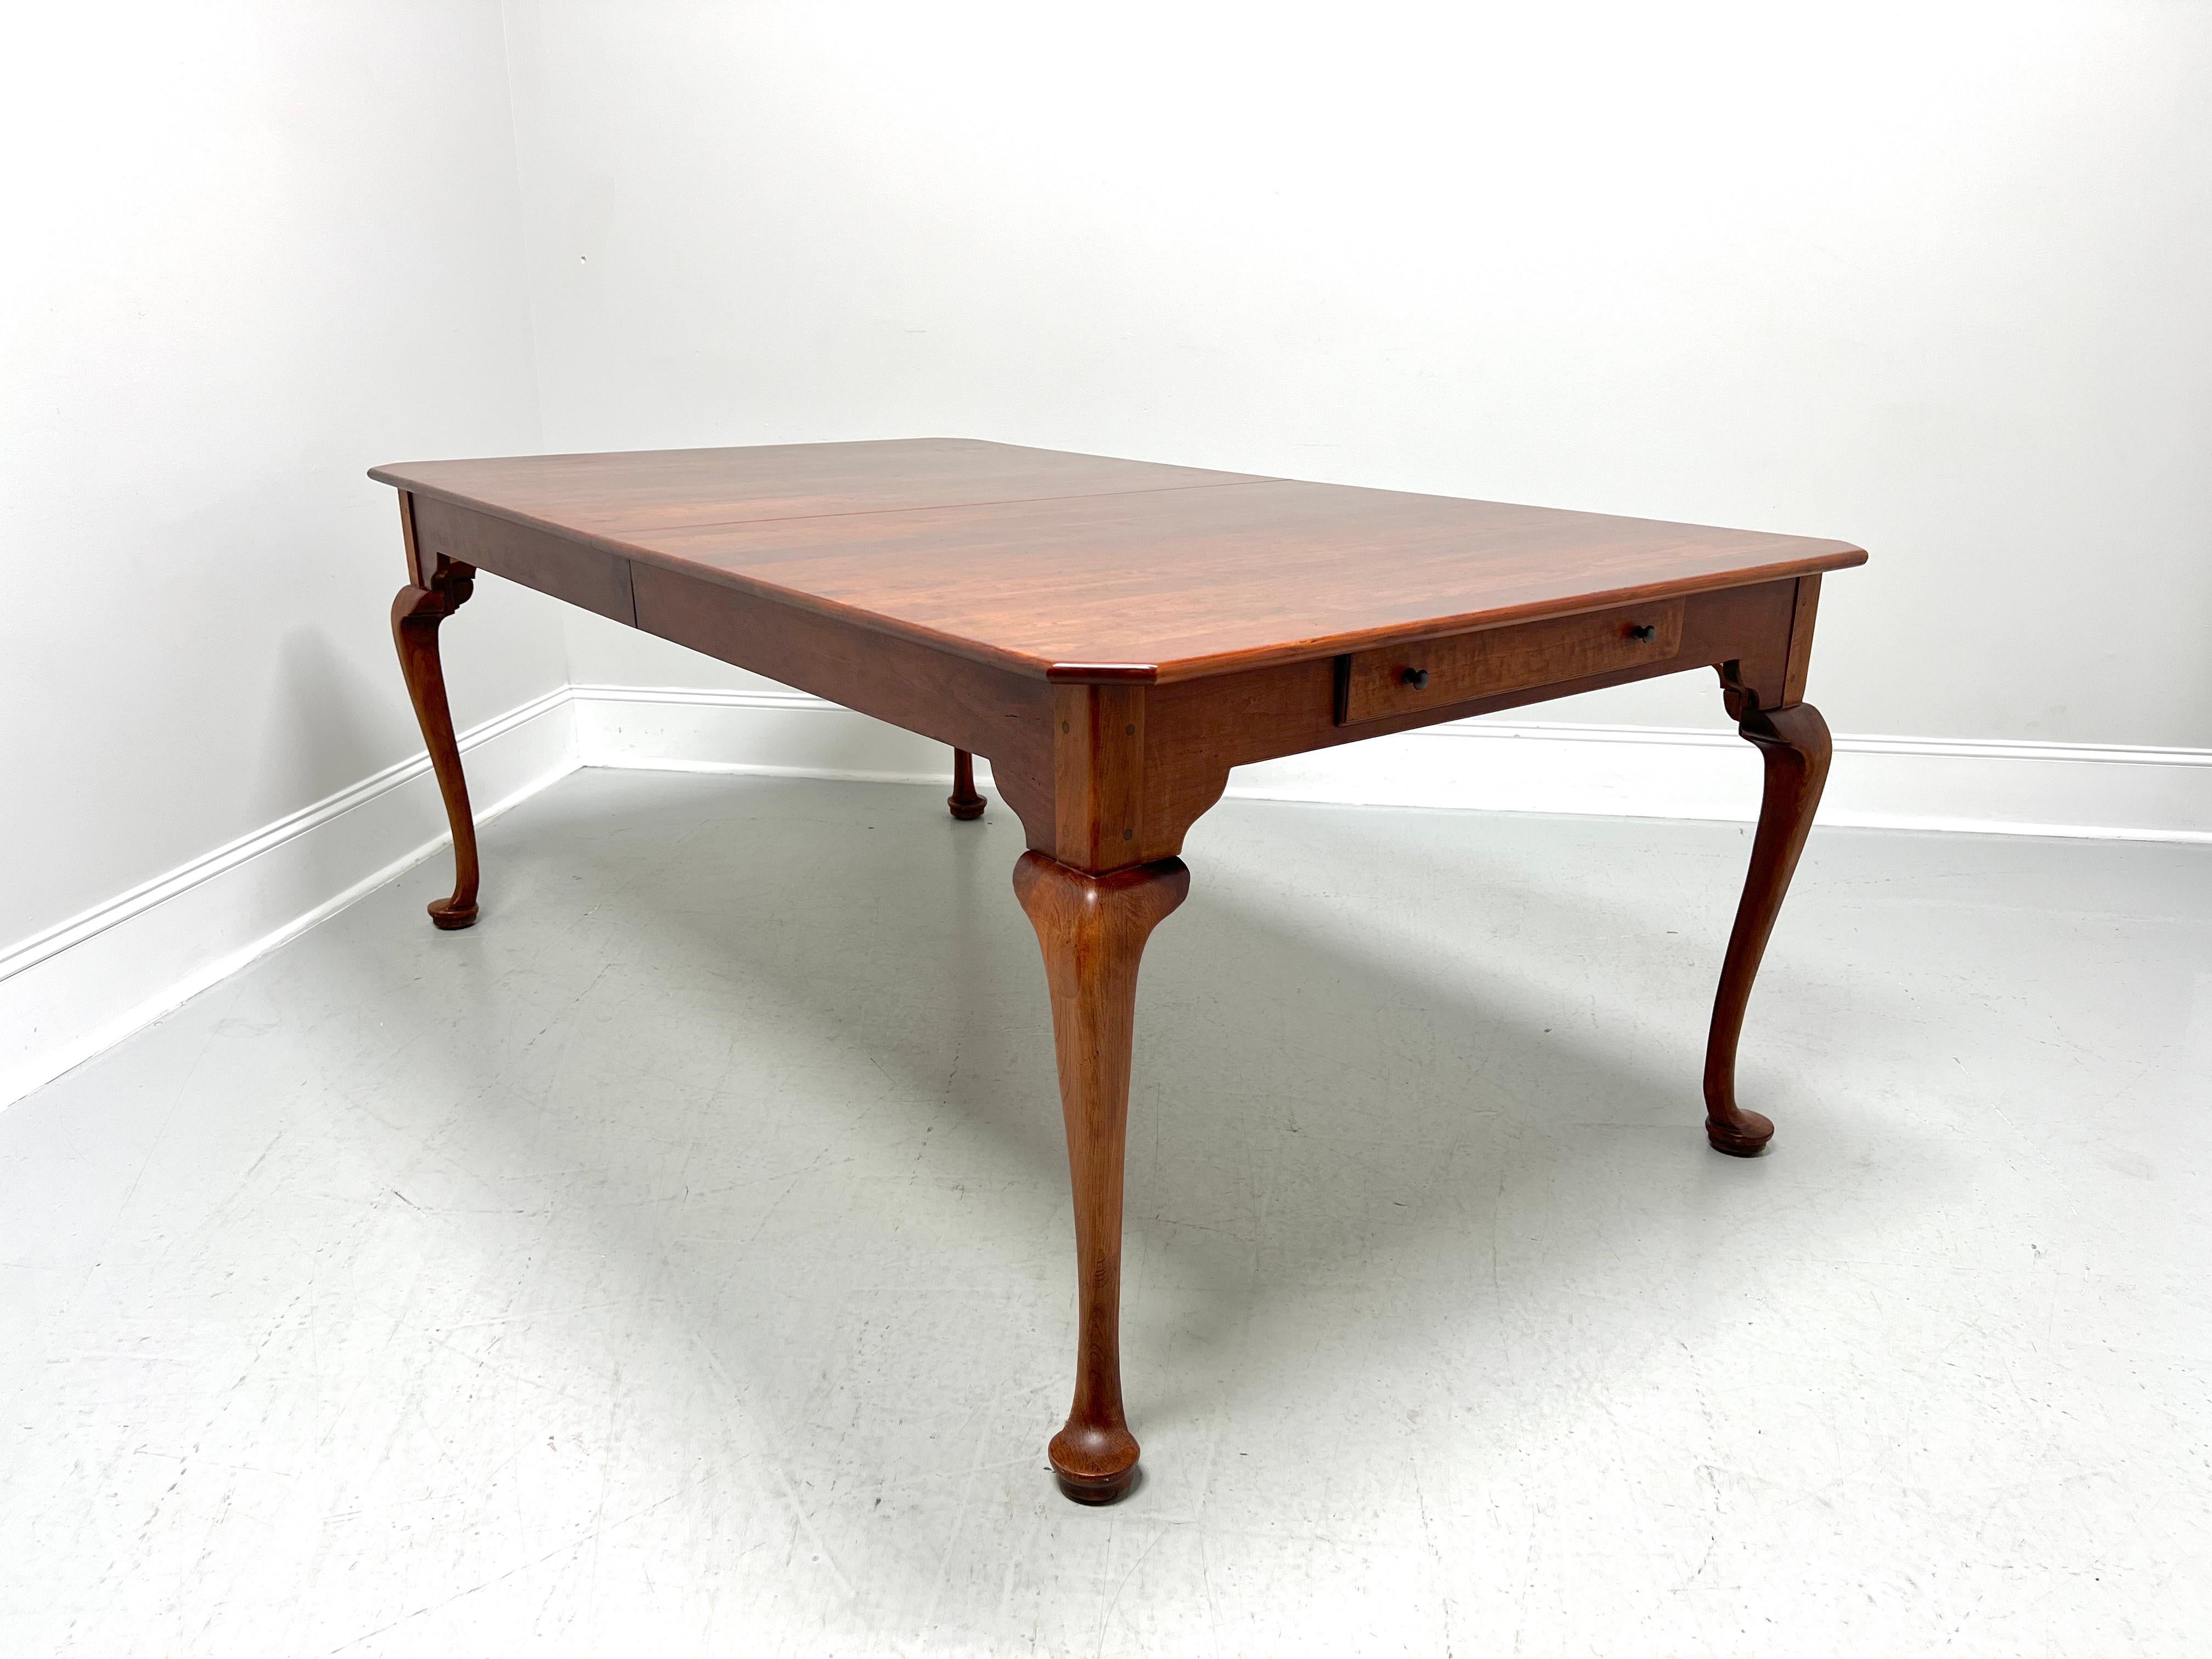 A Queen Anne Farmhouse style rectangular dining table by Lexington Furniture, from their Bob Timberlake Collection. Solid cherry wood, rounded edge with clipped corners to the top, smooth apron carved at legs, one felt lined drawer of dovetail